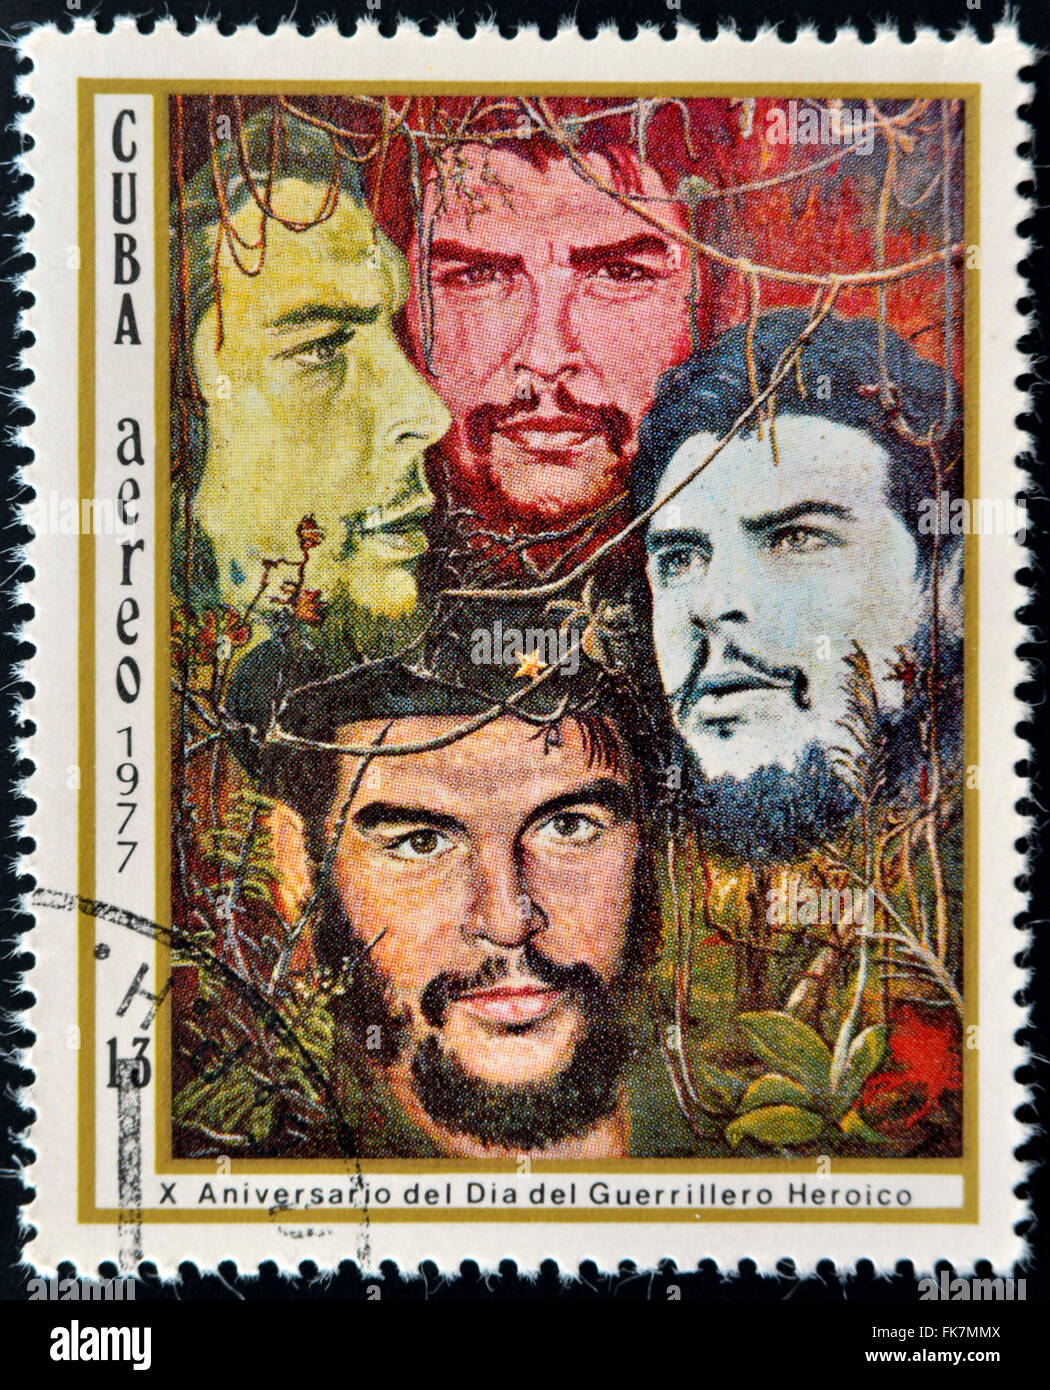 CUBA -CIRCA 1977: Stamp Shows Image Ernesto Che Guevara and Dedicated to the 10th Anniversary of the Day of the Heroic Guerrilla Stock Photo